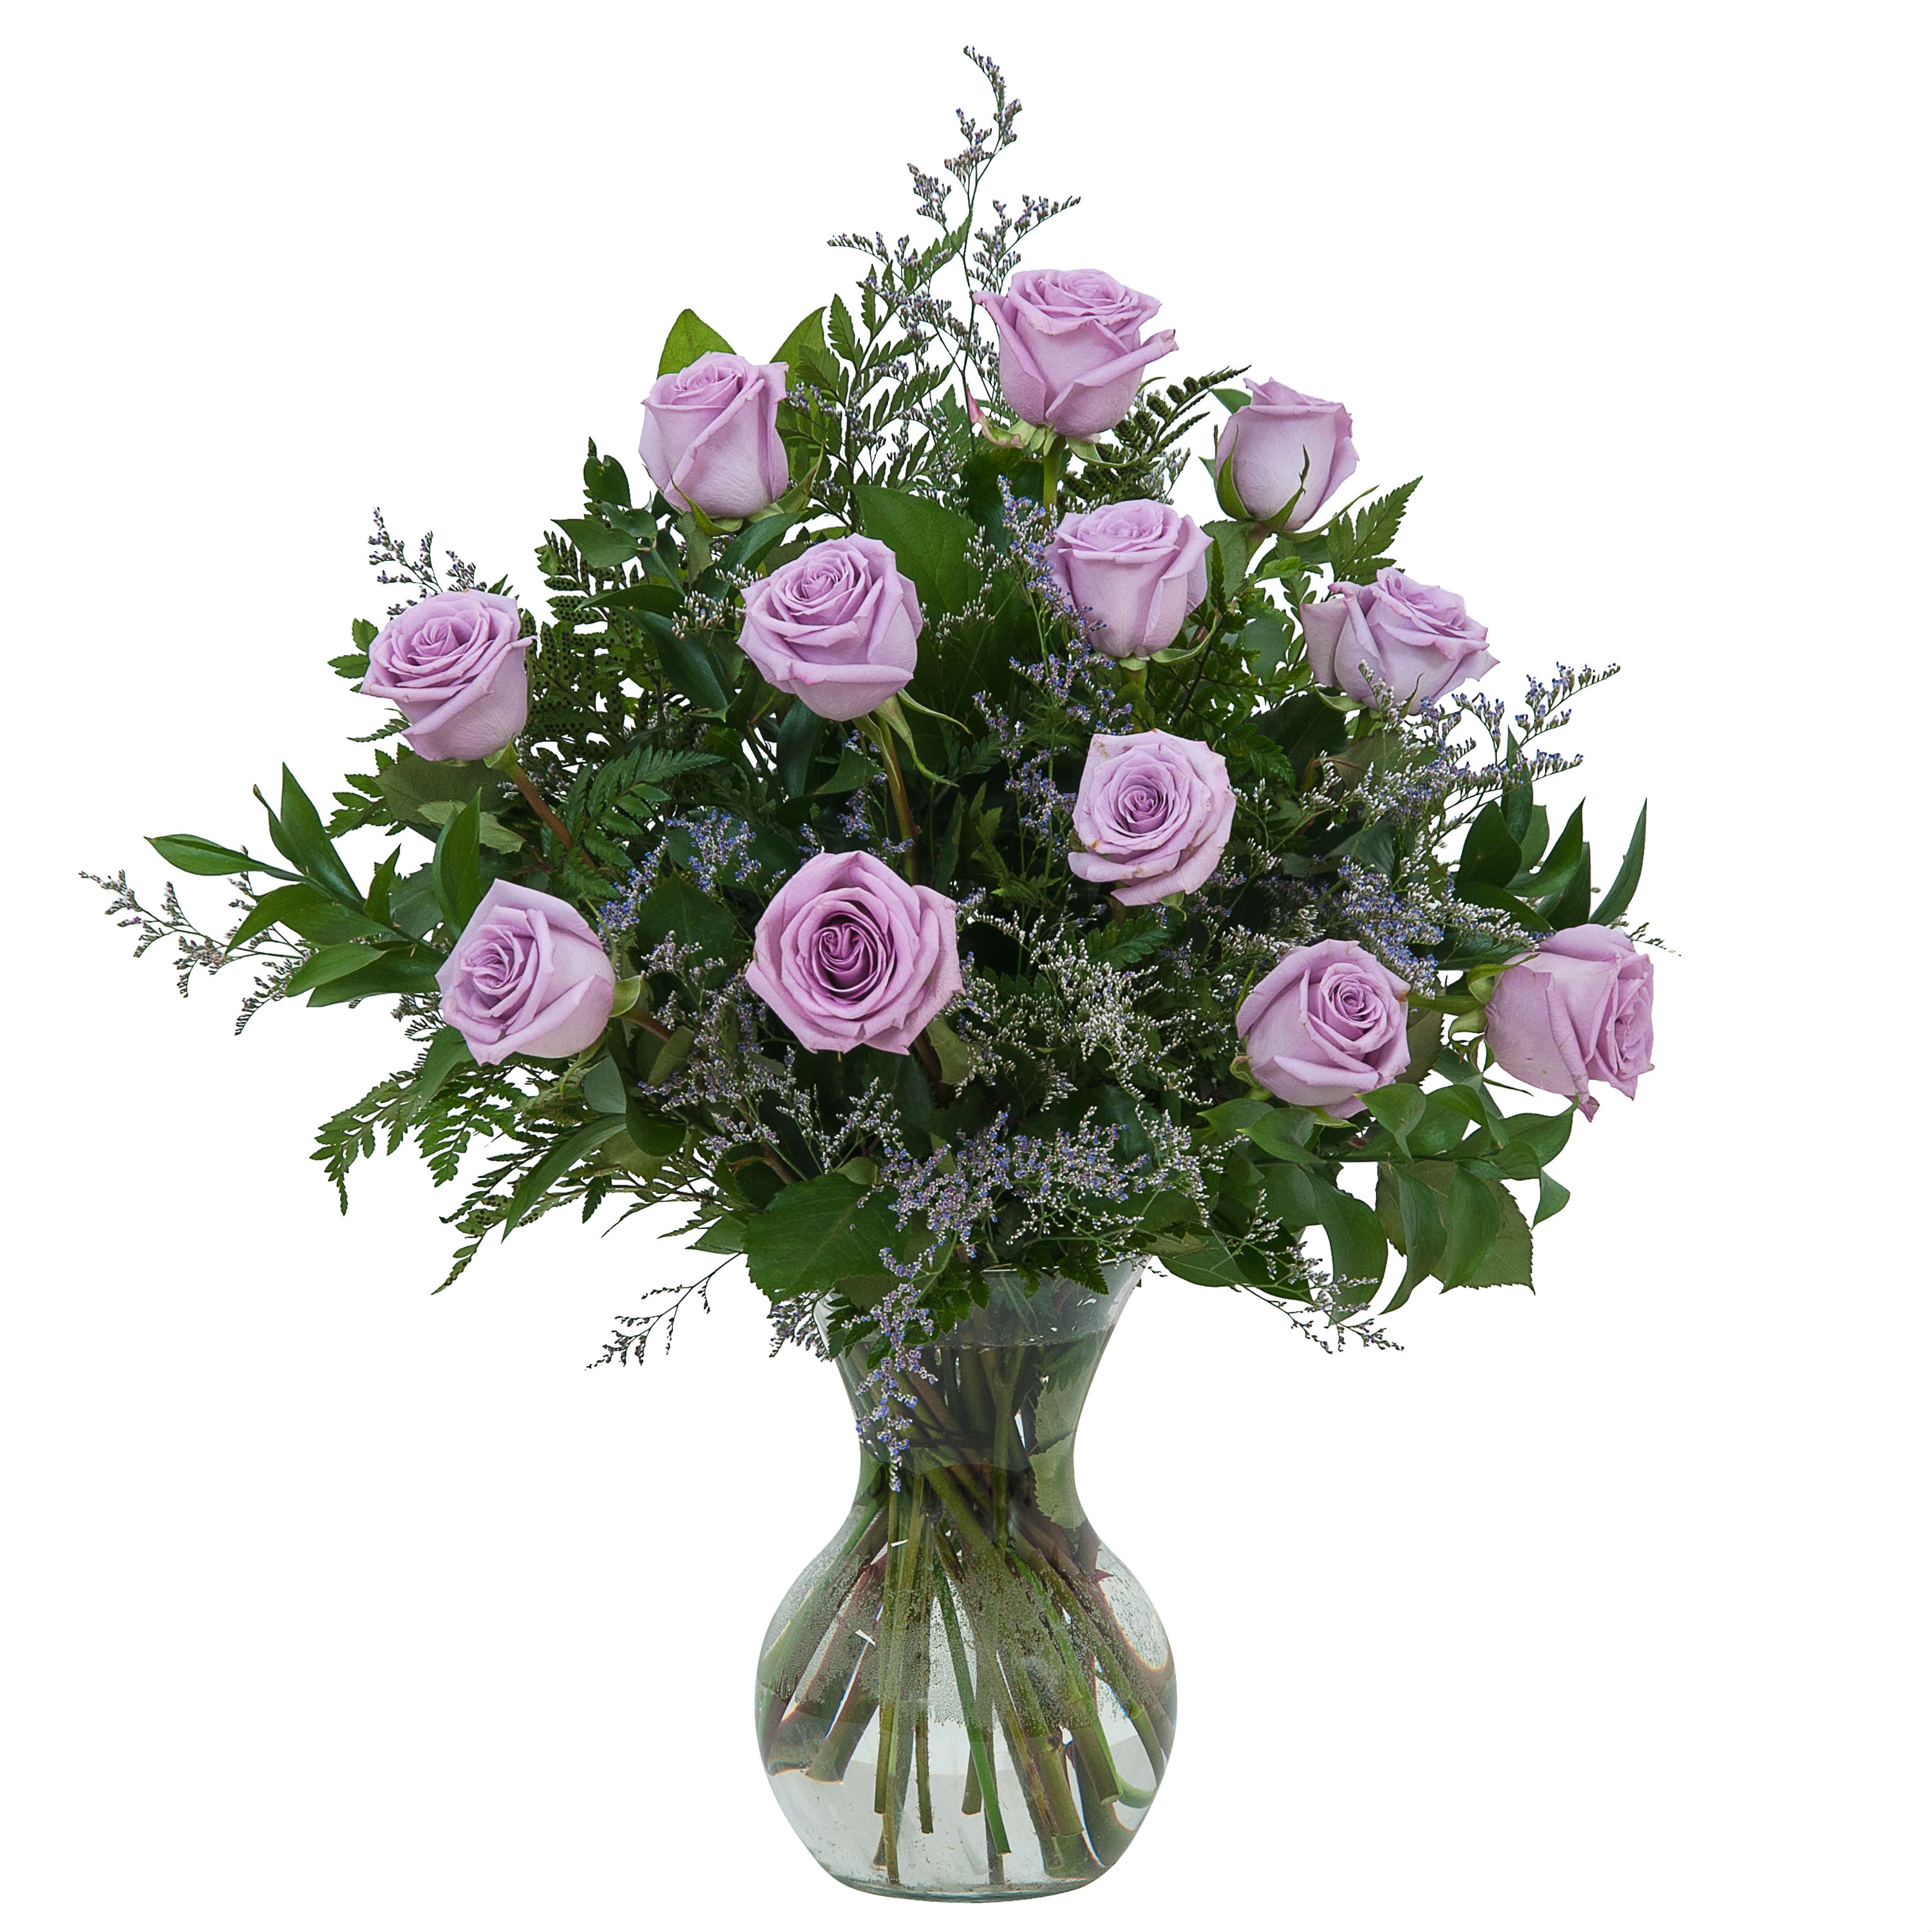 Lovely Lavender Roses - Lavender Roses and soft accent flowers designed in a clear glass vase.TMF-598